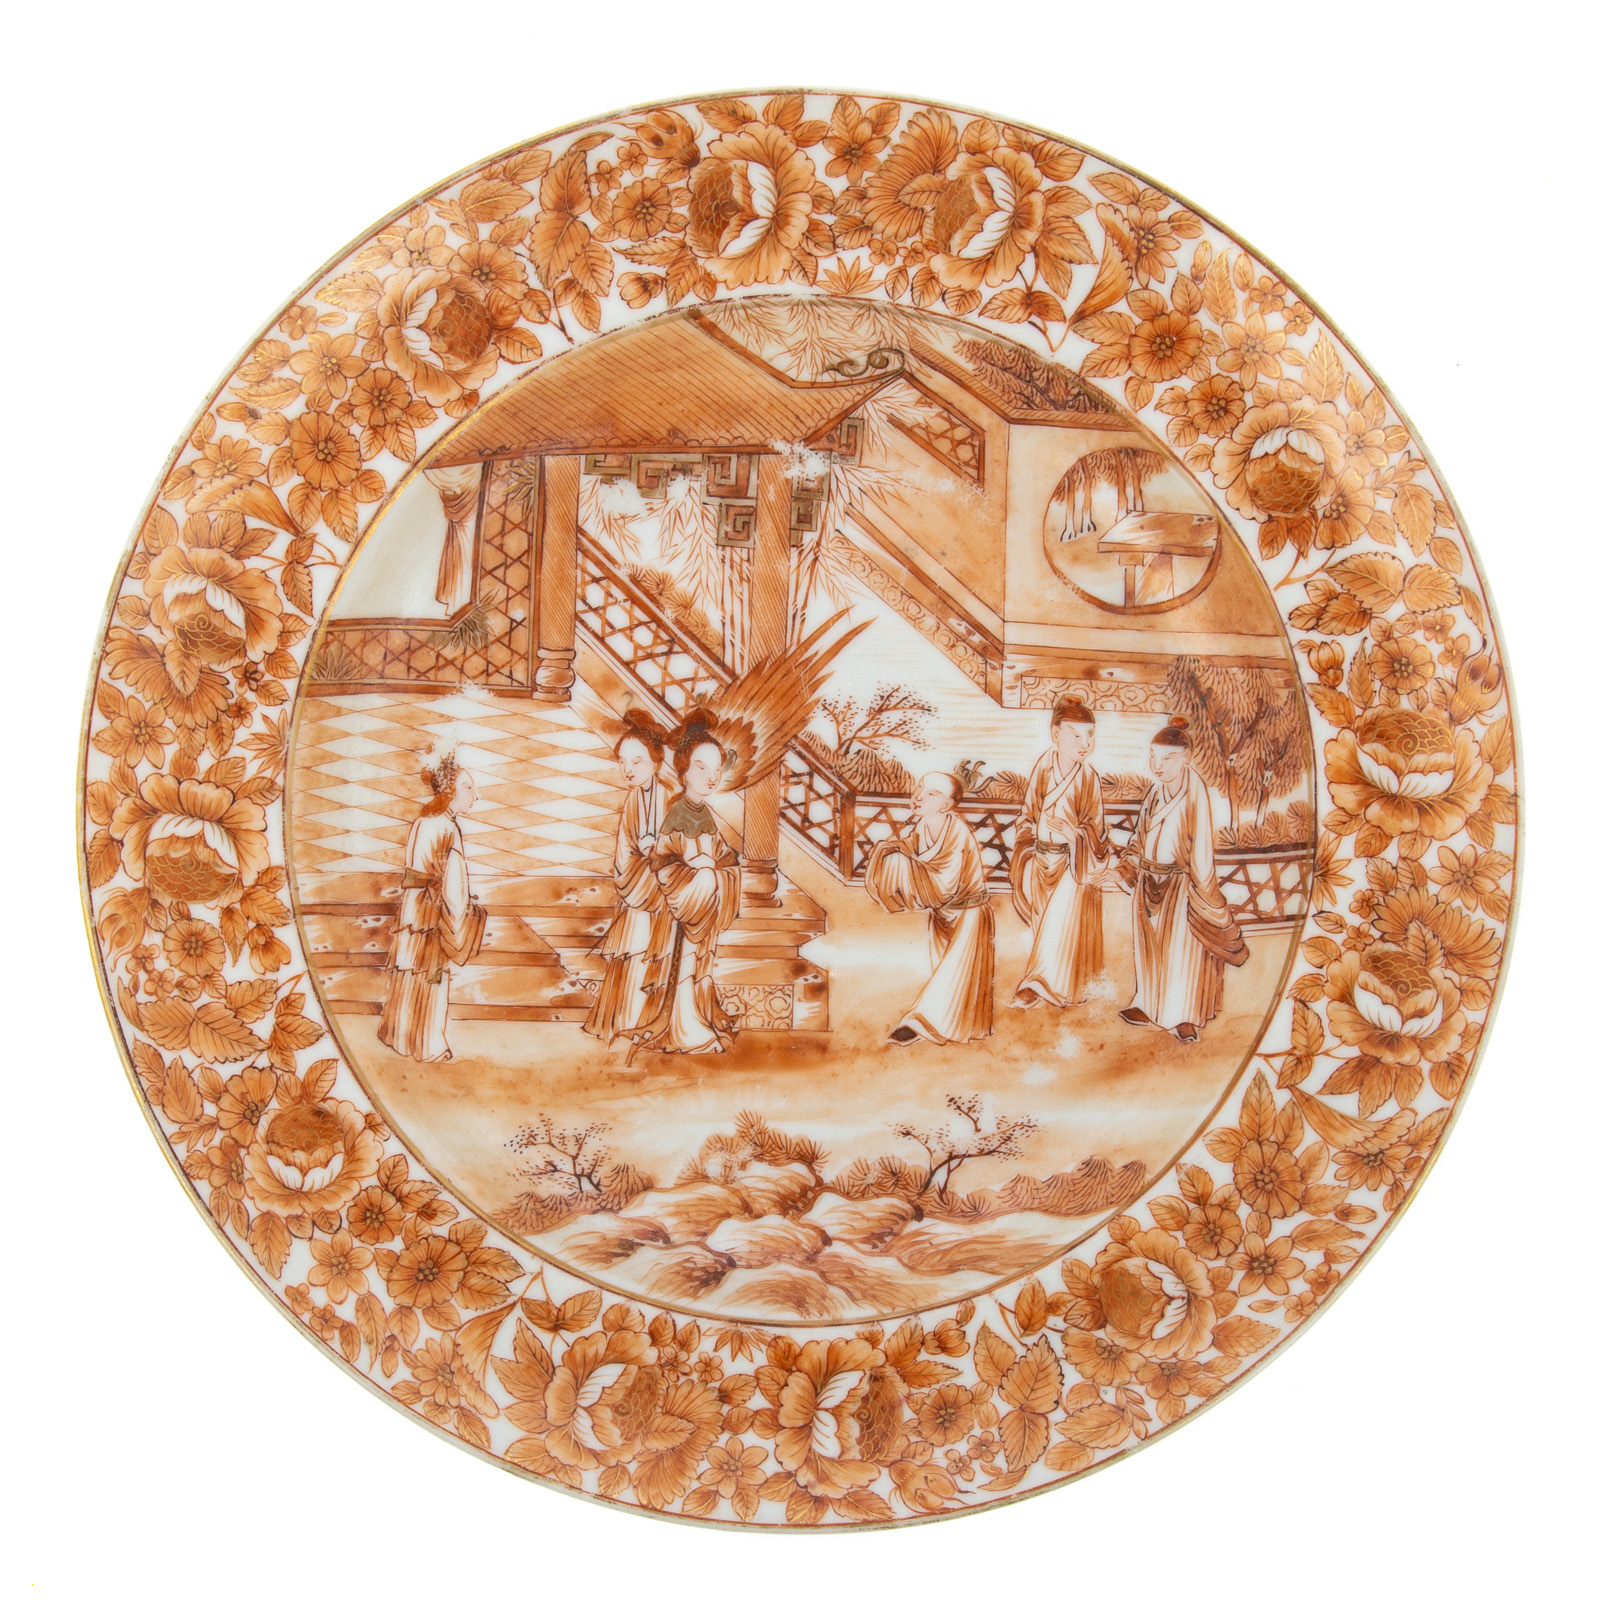 CHINESE EXPORT SEPIA SOUP PLATE 36ad0d